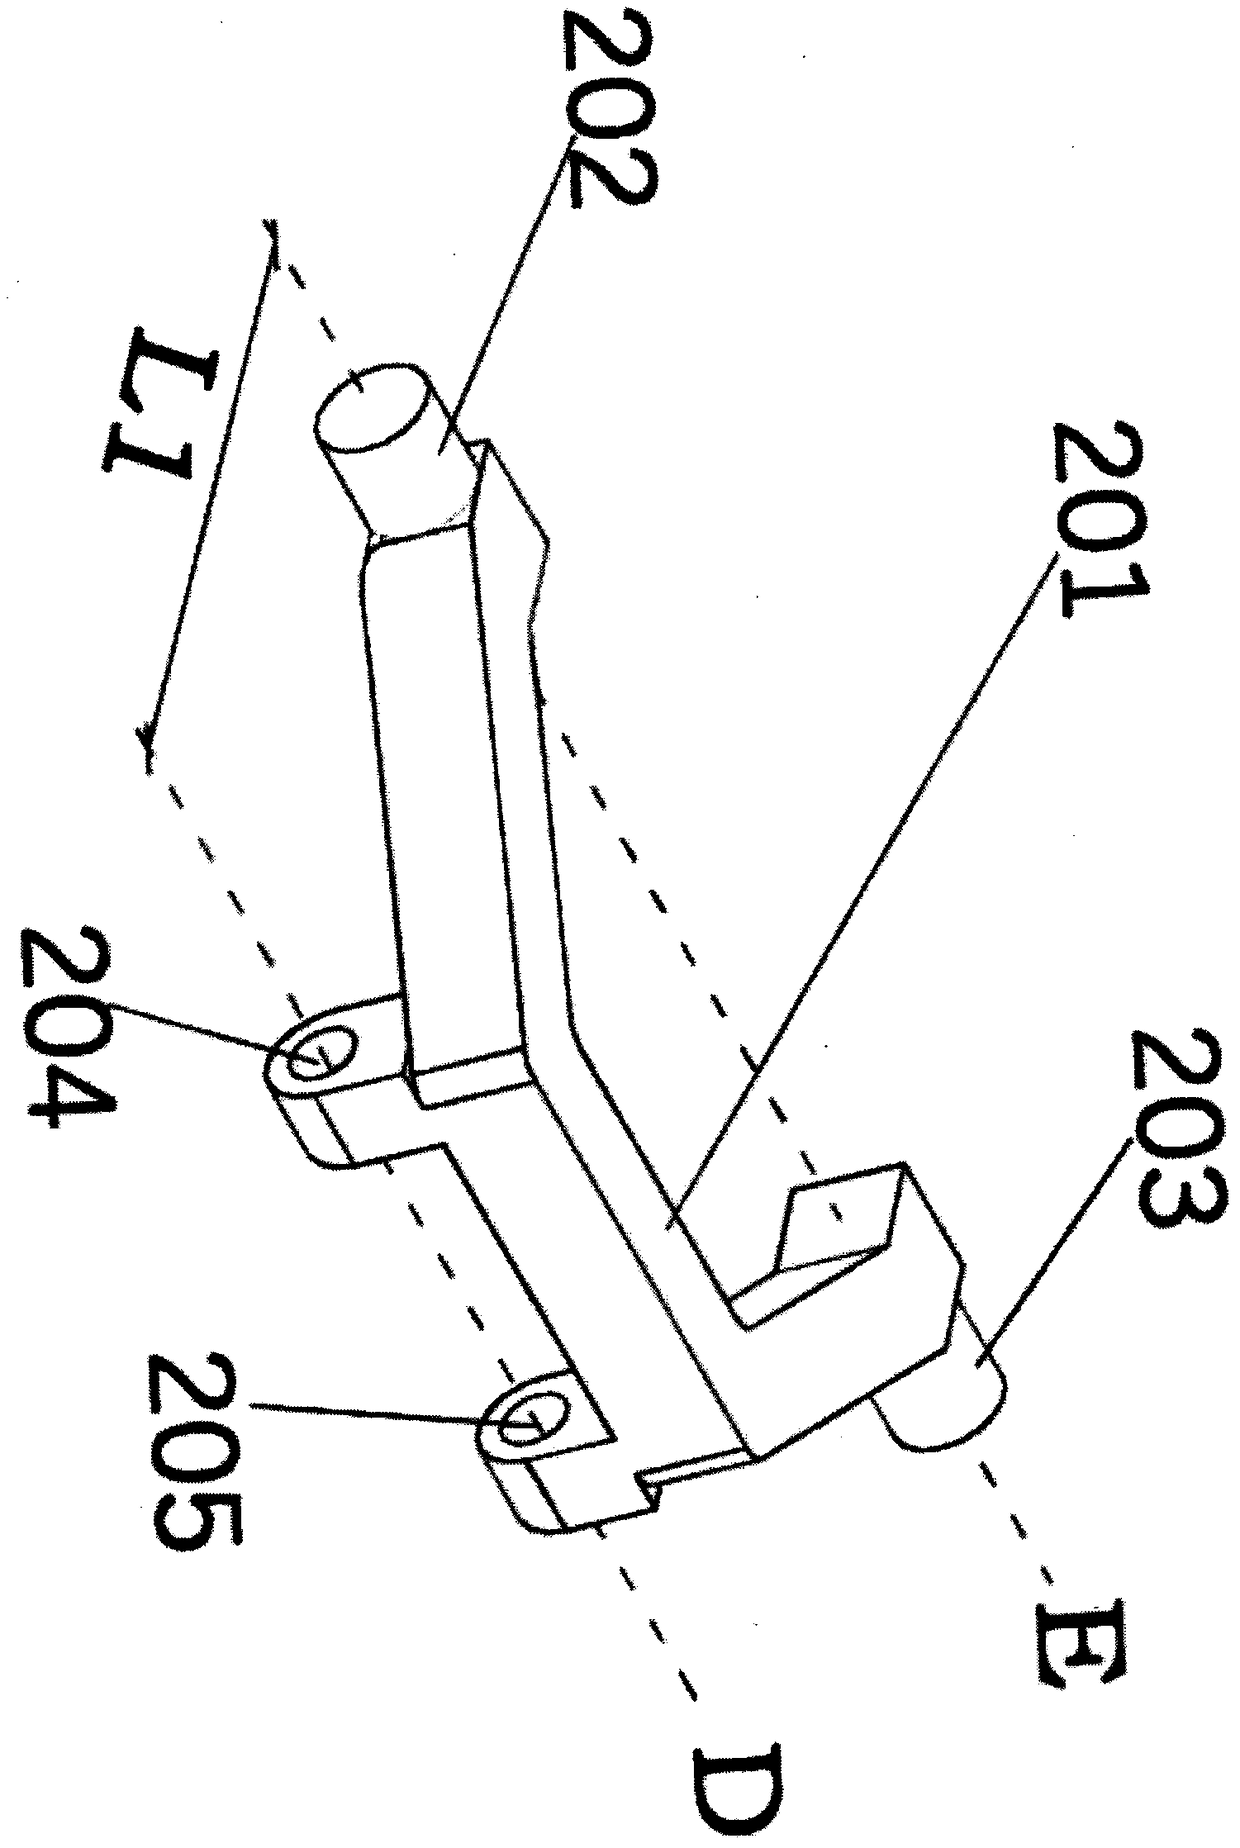 Independent suspension system with invariable wheel tread and wheel base inclination parameters